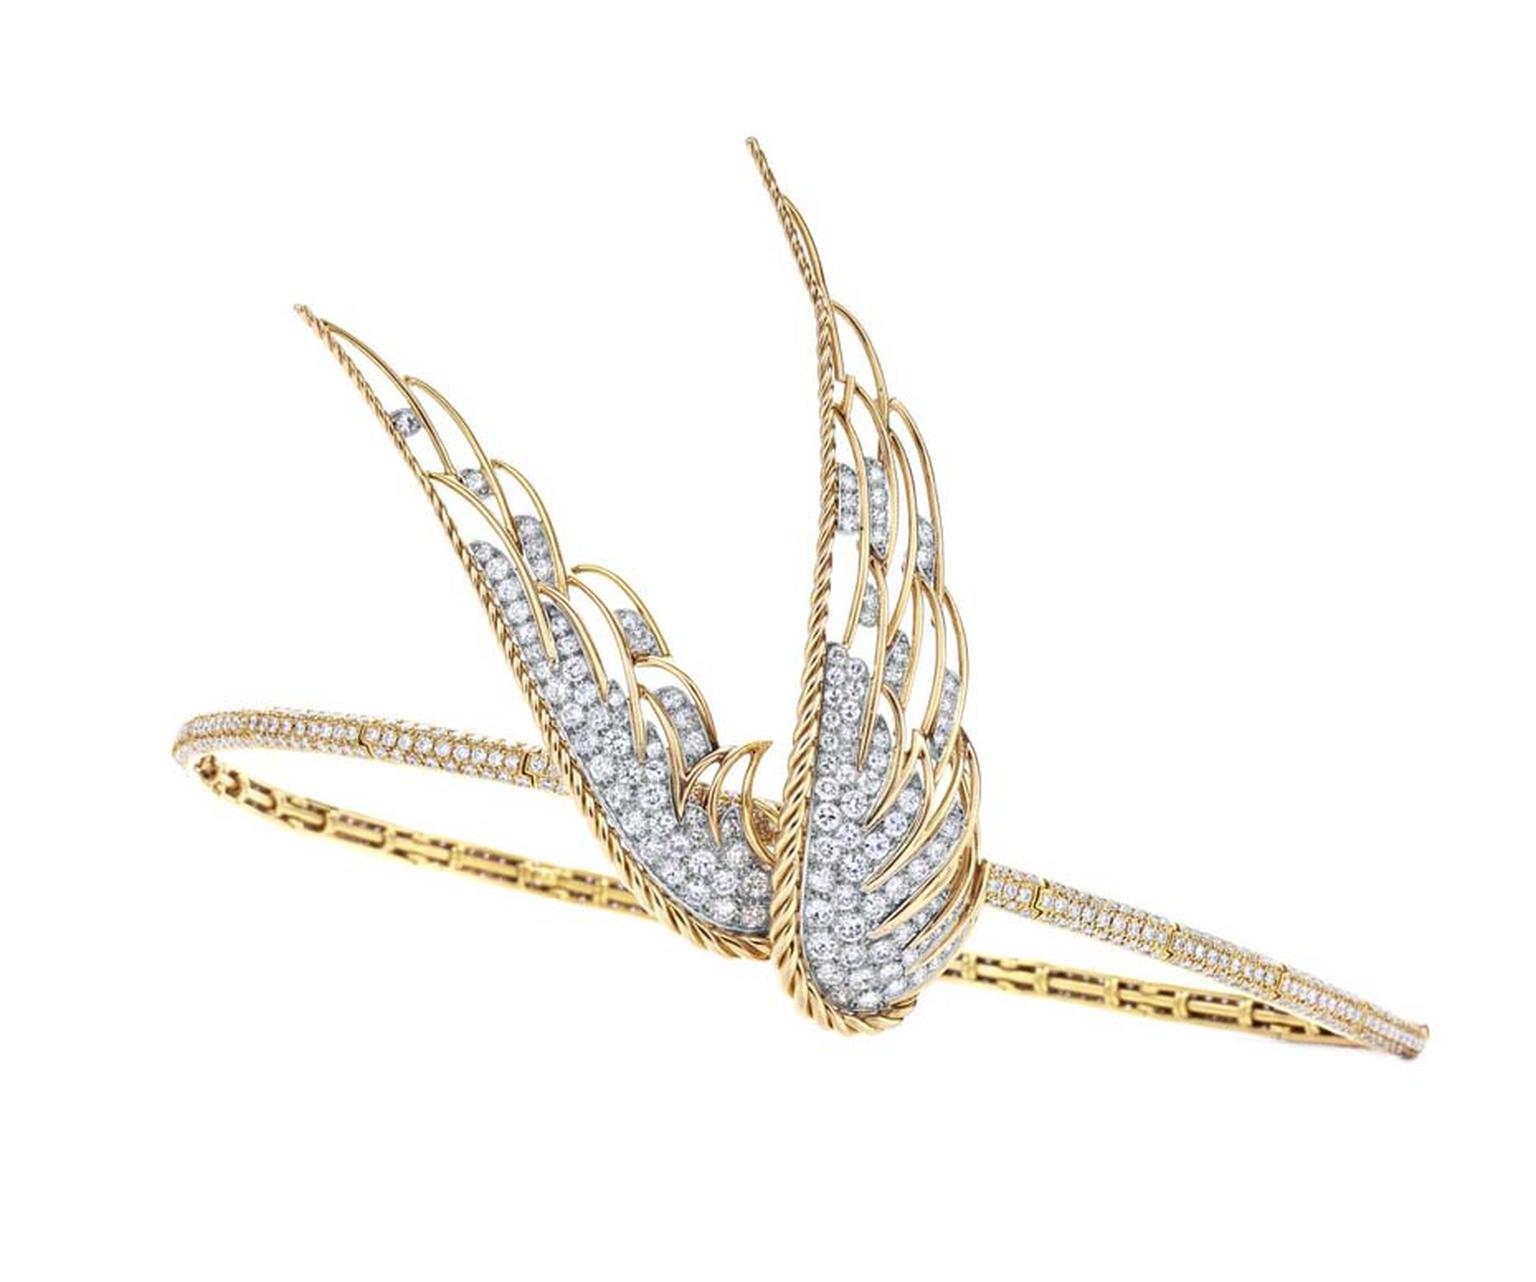 Fred Leighton bridal tiara in yellow gold with pavé diamonds featuring a 1950s Winged Victory brooch.